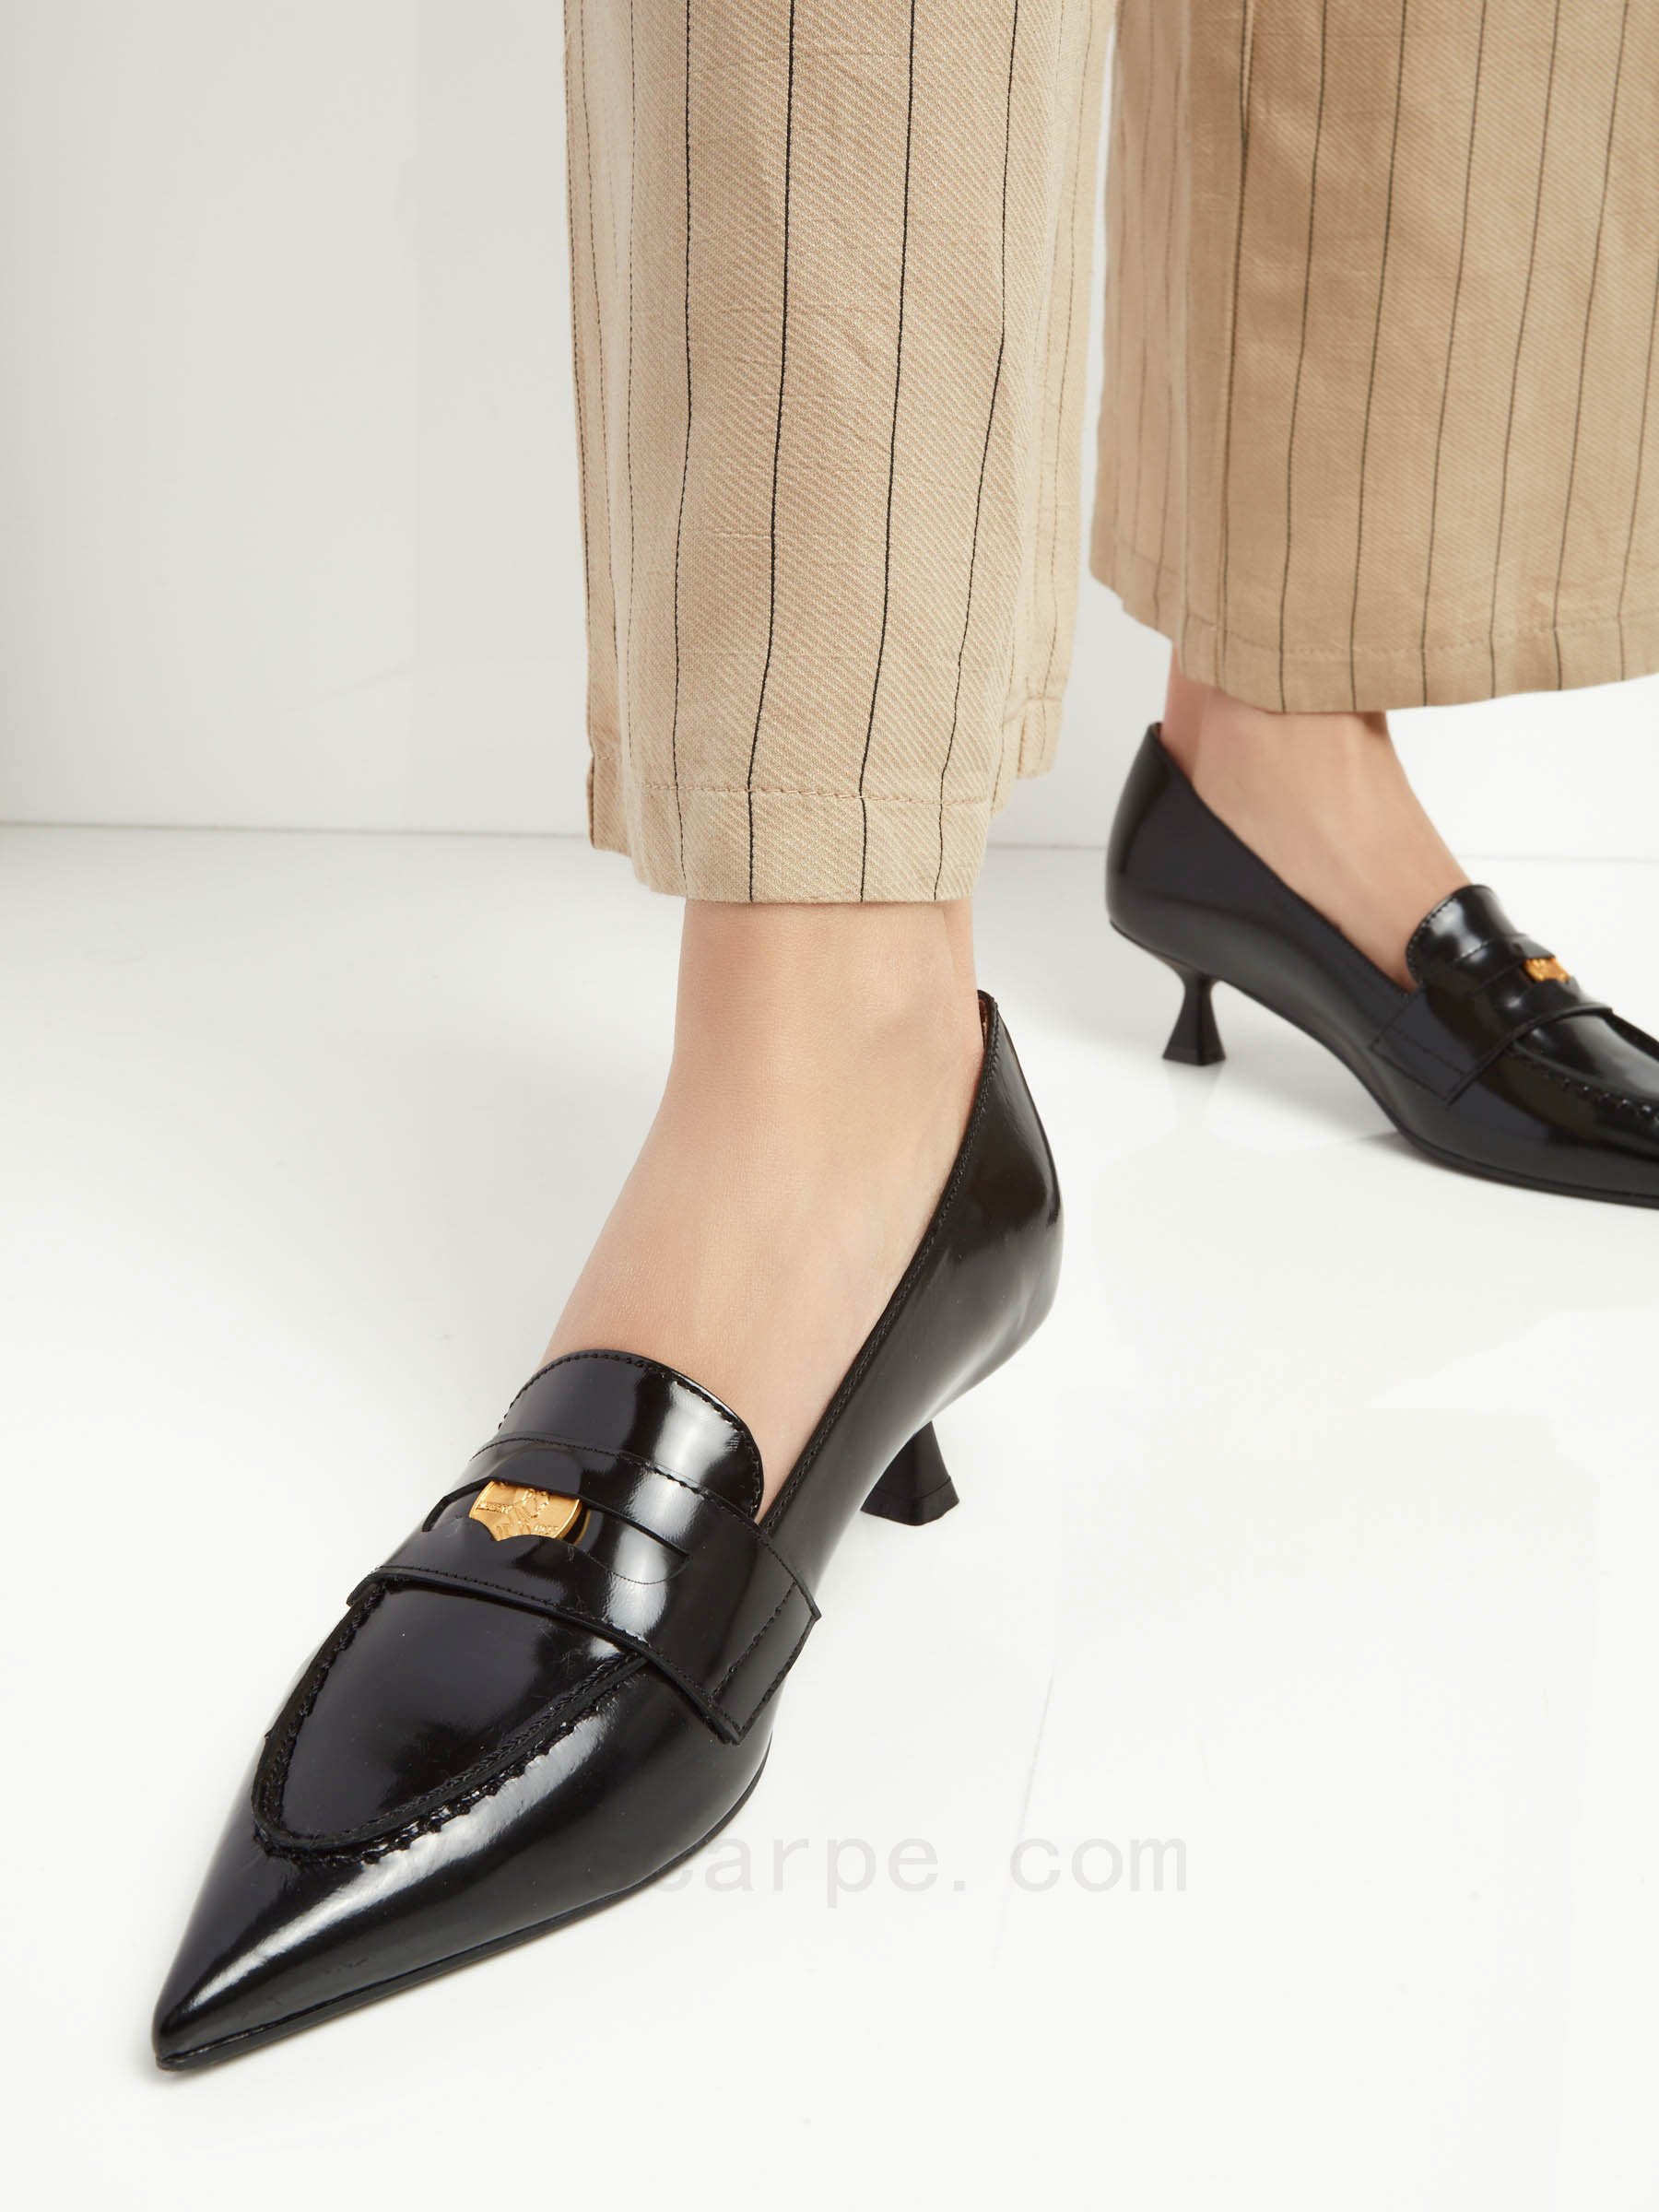 Black Friday Leather Pumps F08161027-0400